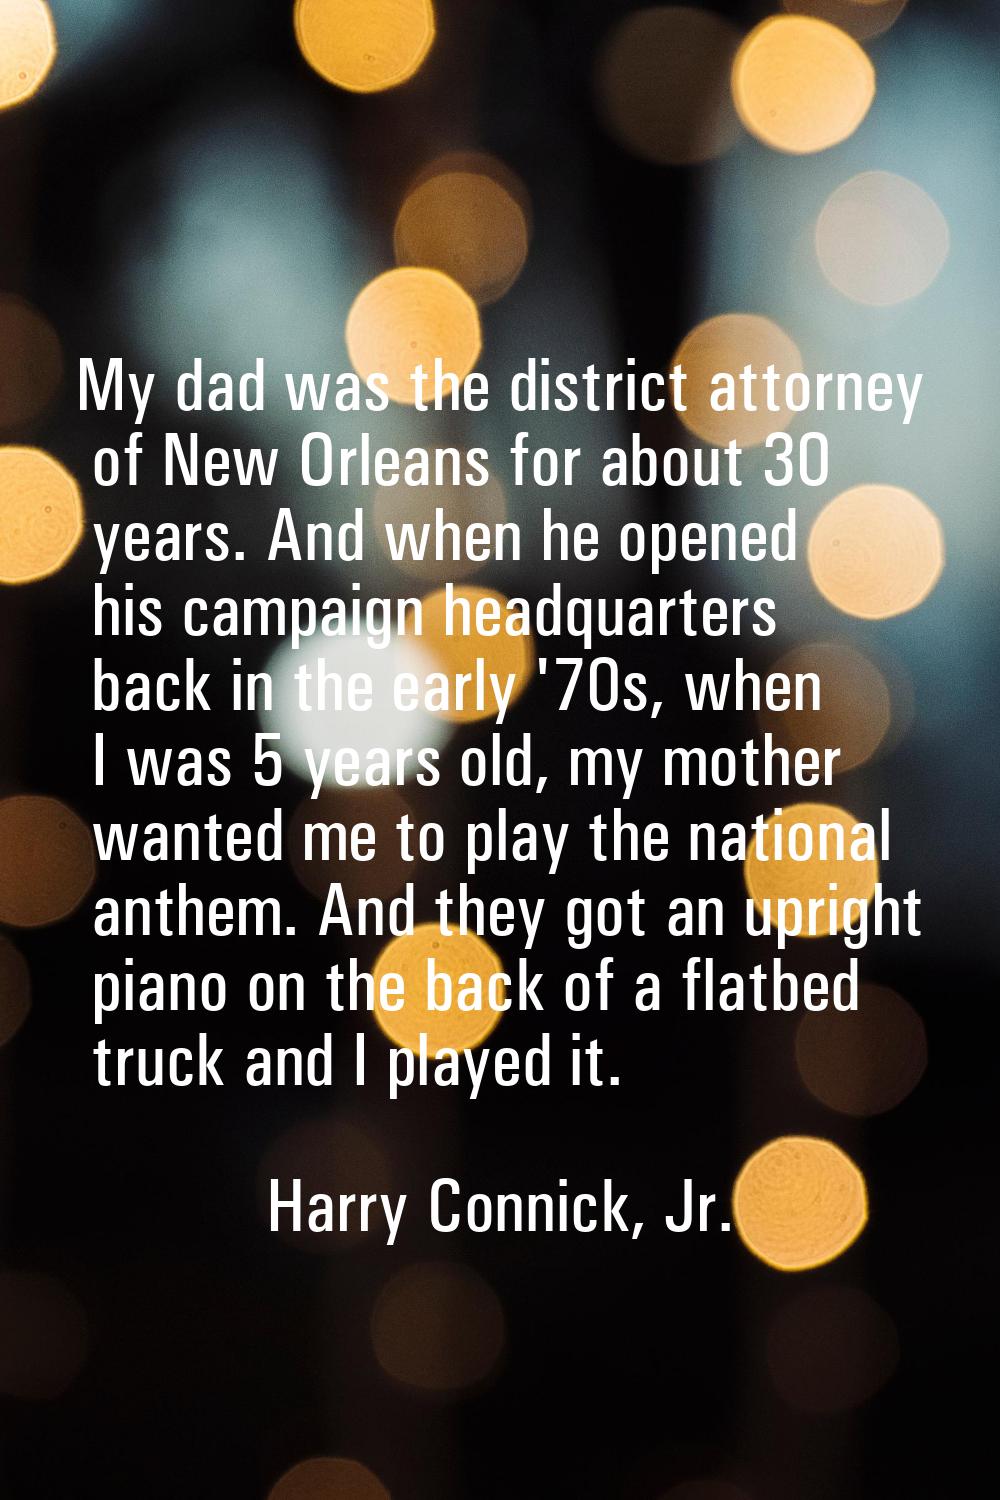 My dad was the district attorney of New Orleans for about 30 years. And when he opened his campaign